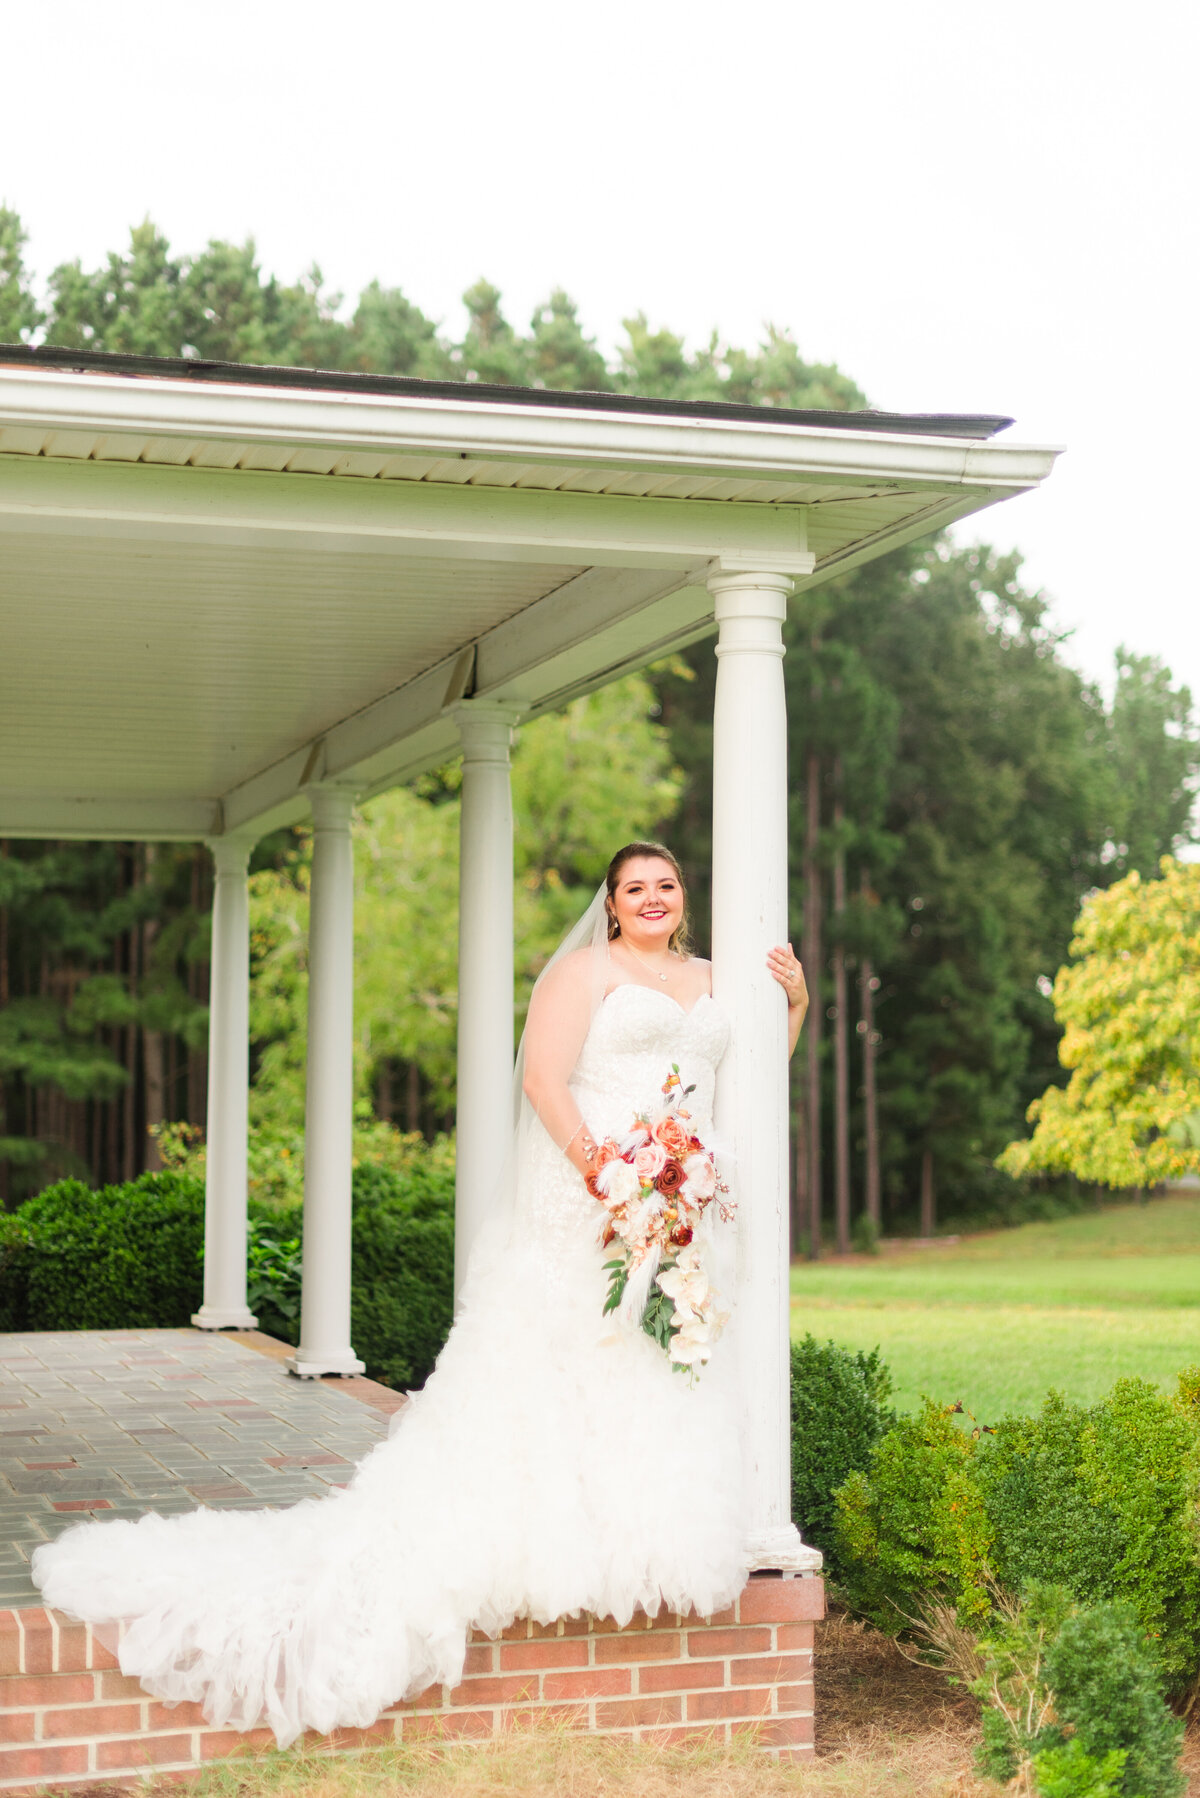 Brittany Overby's Bridals - Photography by Gerri Anna-88